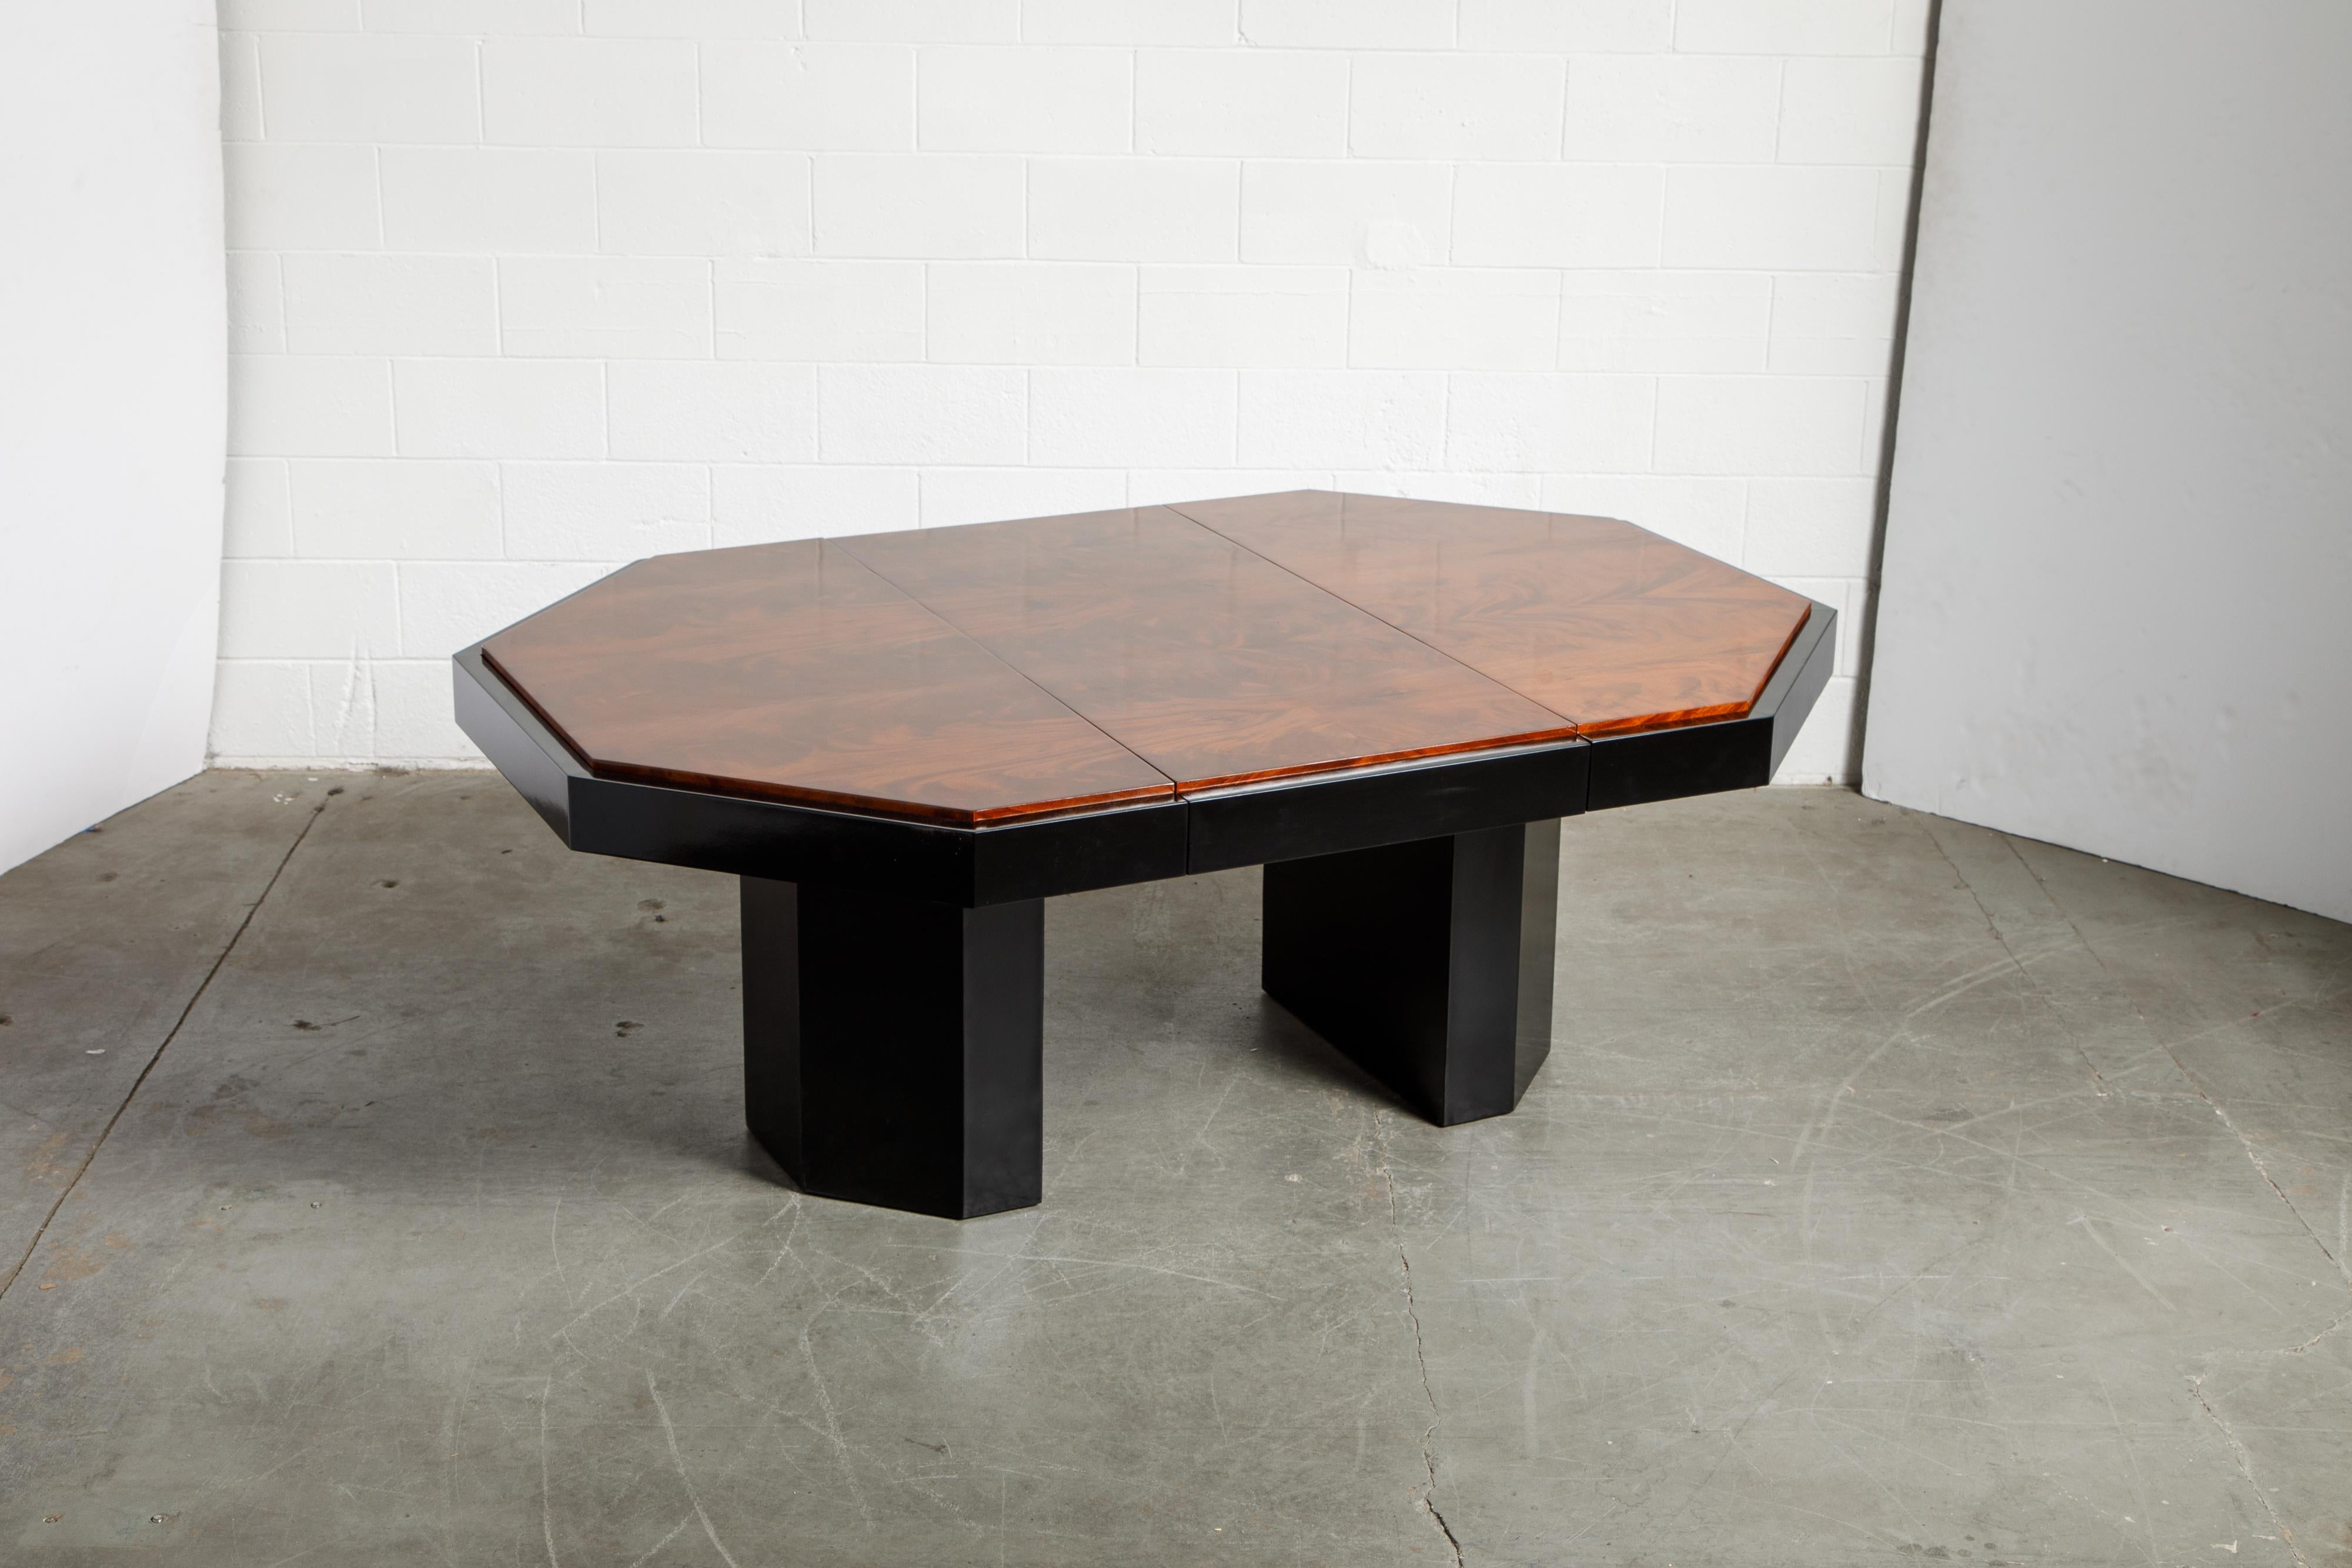 Late 20th Century Paul Evans for Directional Expandable African Burl Mahogany Dining Table, c 1980